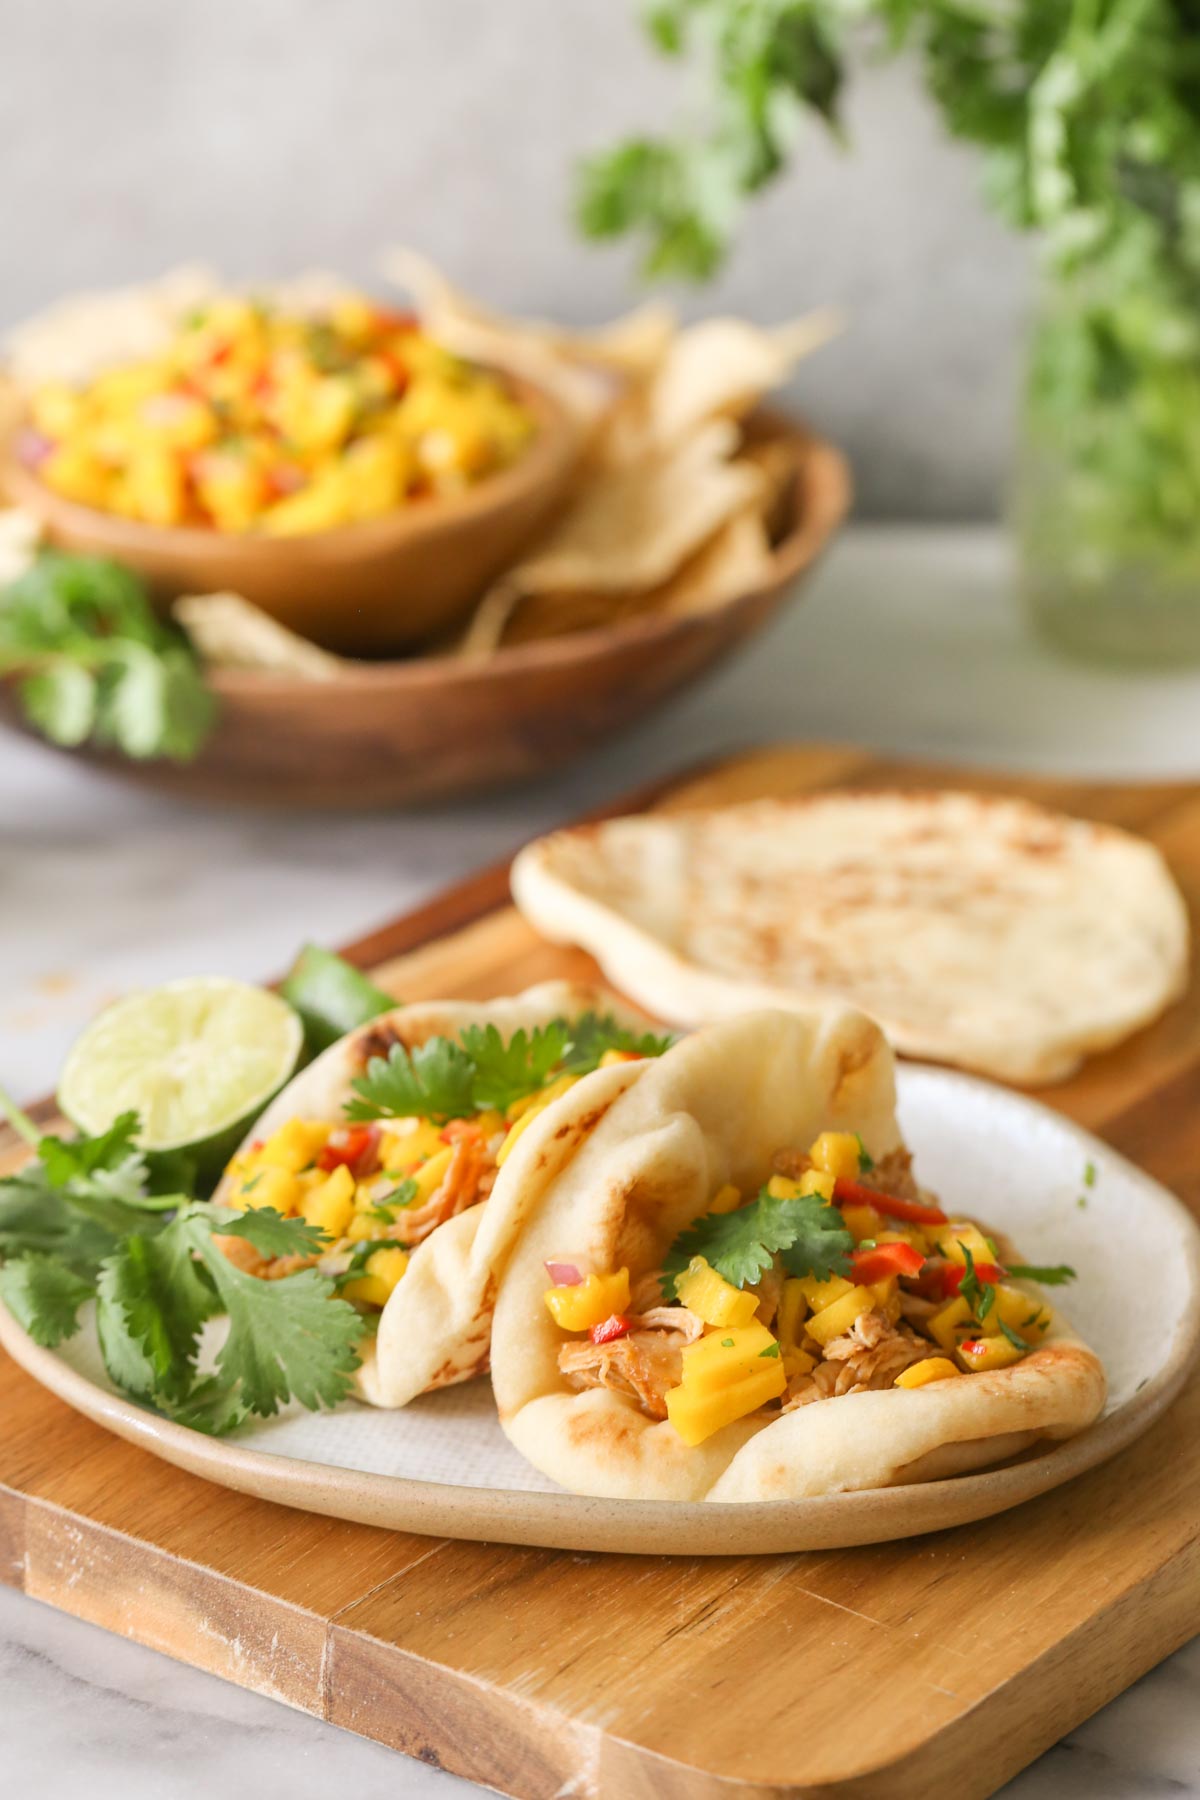 Two pieces of naan bread filled with Buttery Honey Chipotle Chicken and topped with Mango Lime Salsa on a plate with a lime sliced in half and fresh cilantro, sitting on a wood cutting board with another piece of toasted naan bread, and a wood bowl of tortilla chips, fresh cilantro and a bowl of Mango Lime Salsa in the background.  